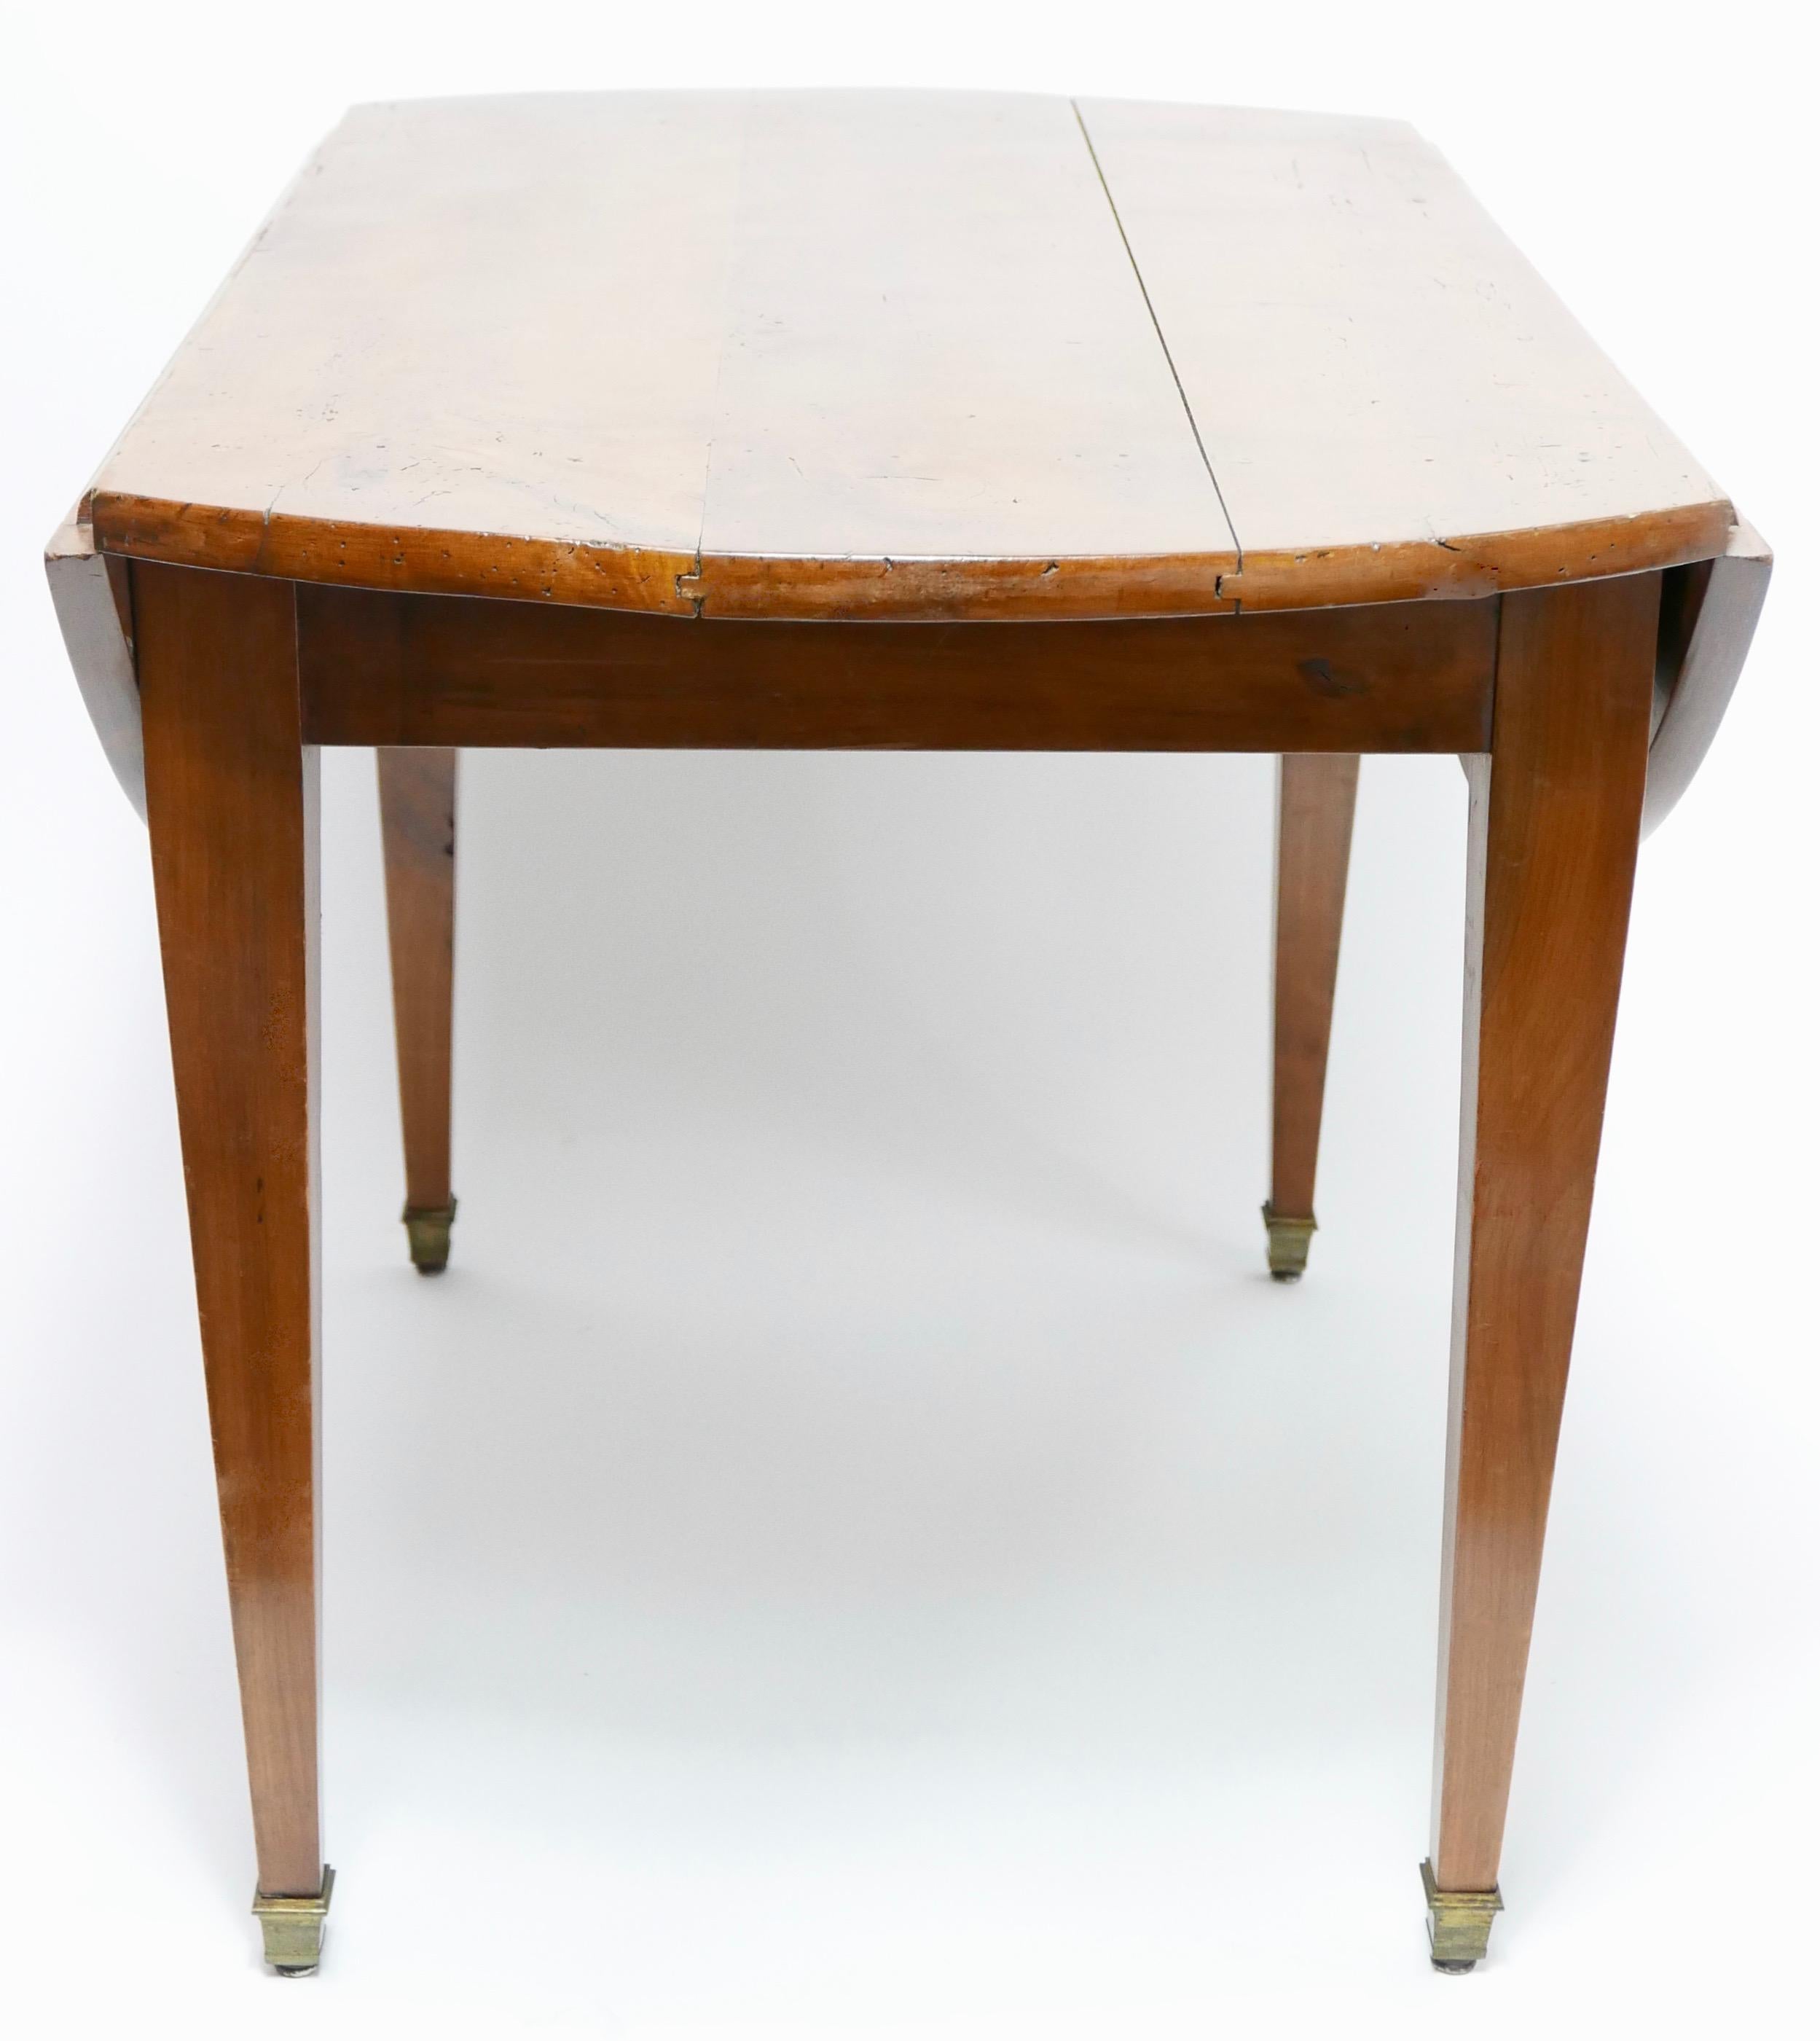 French Cherry Wood Drop-Leaf Table, Early 19th Century 7